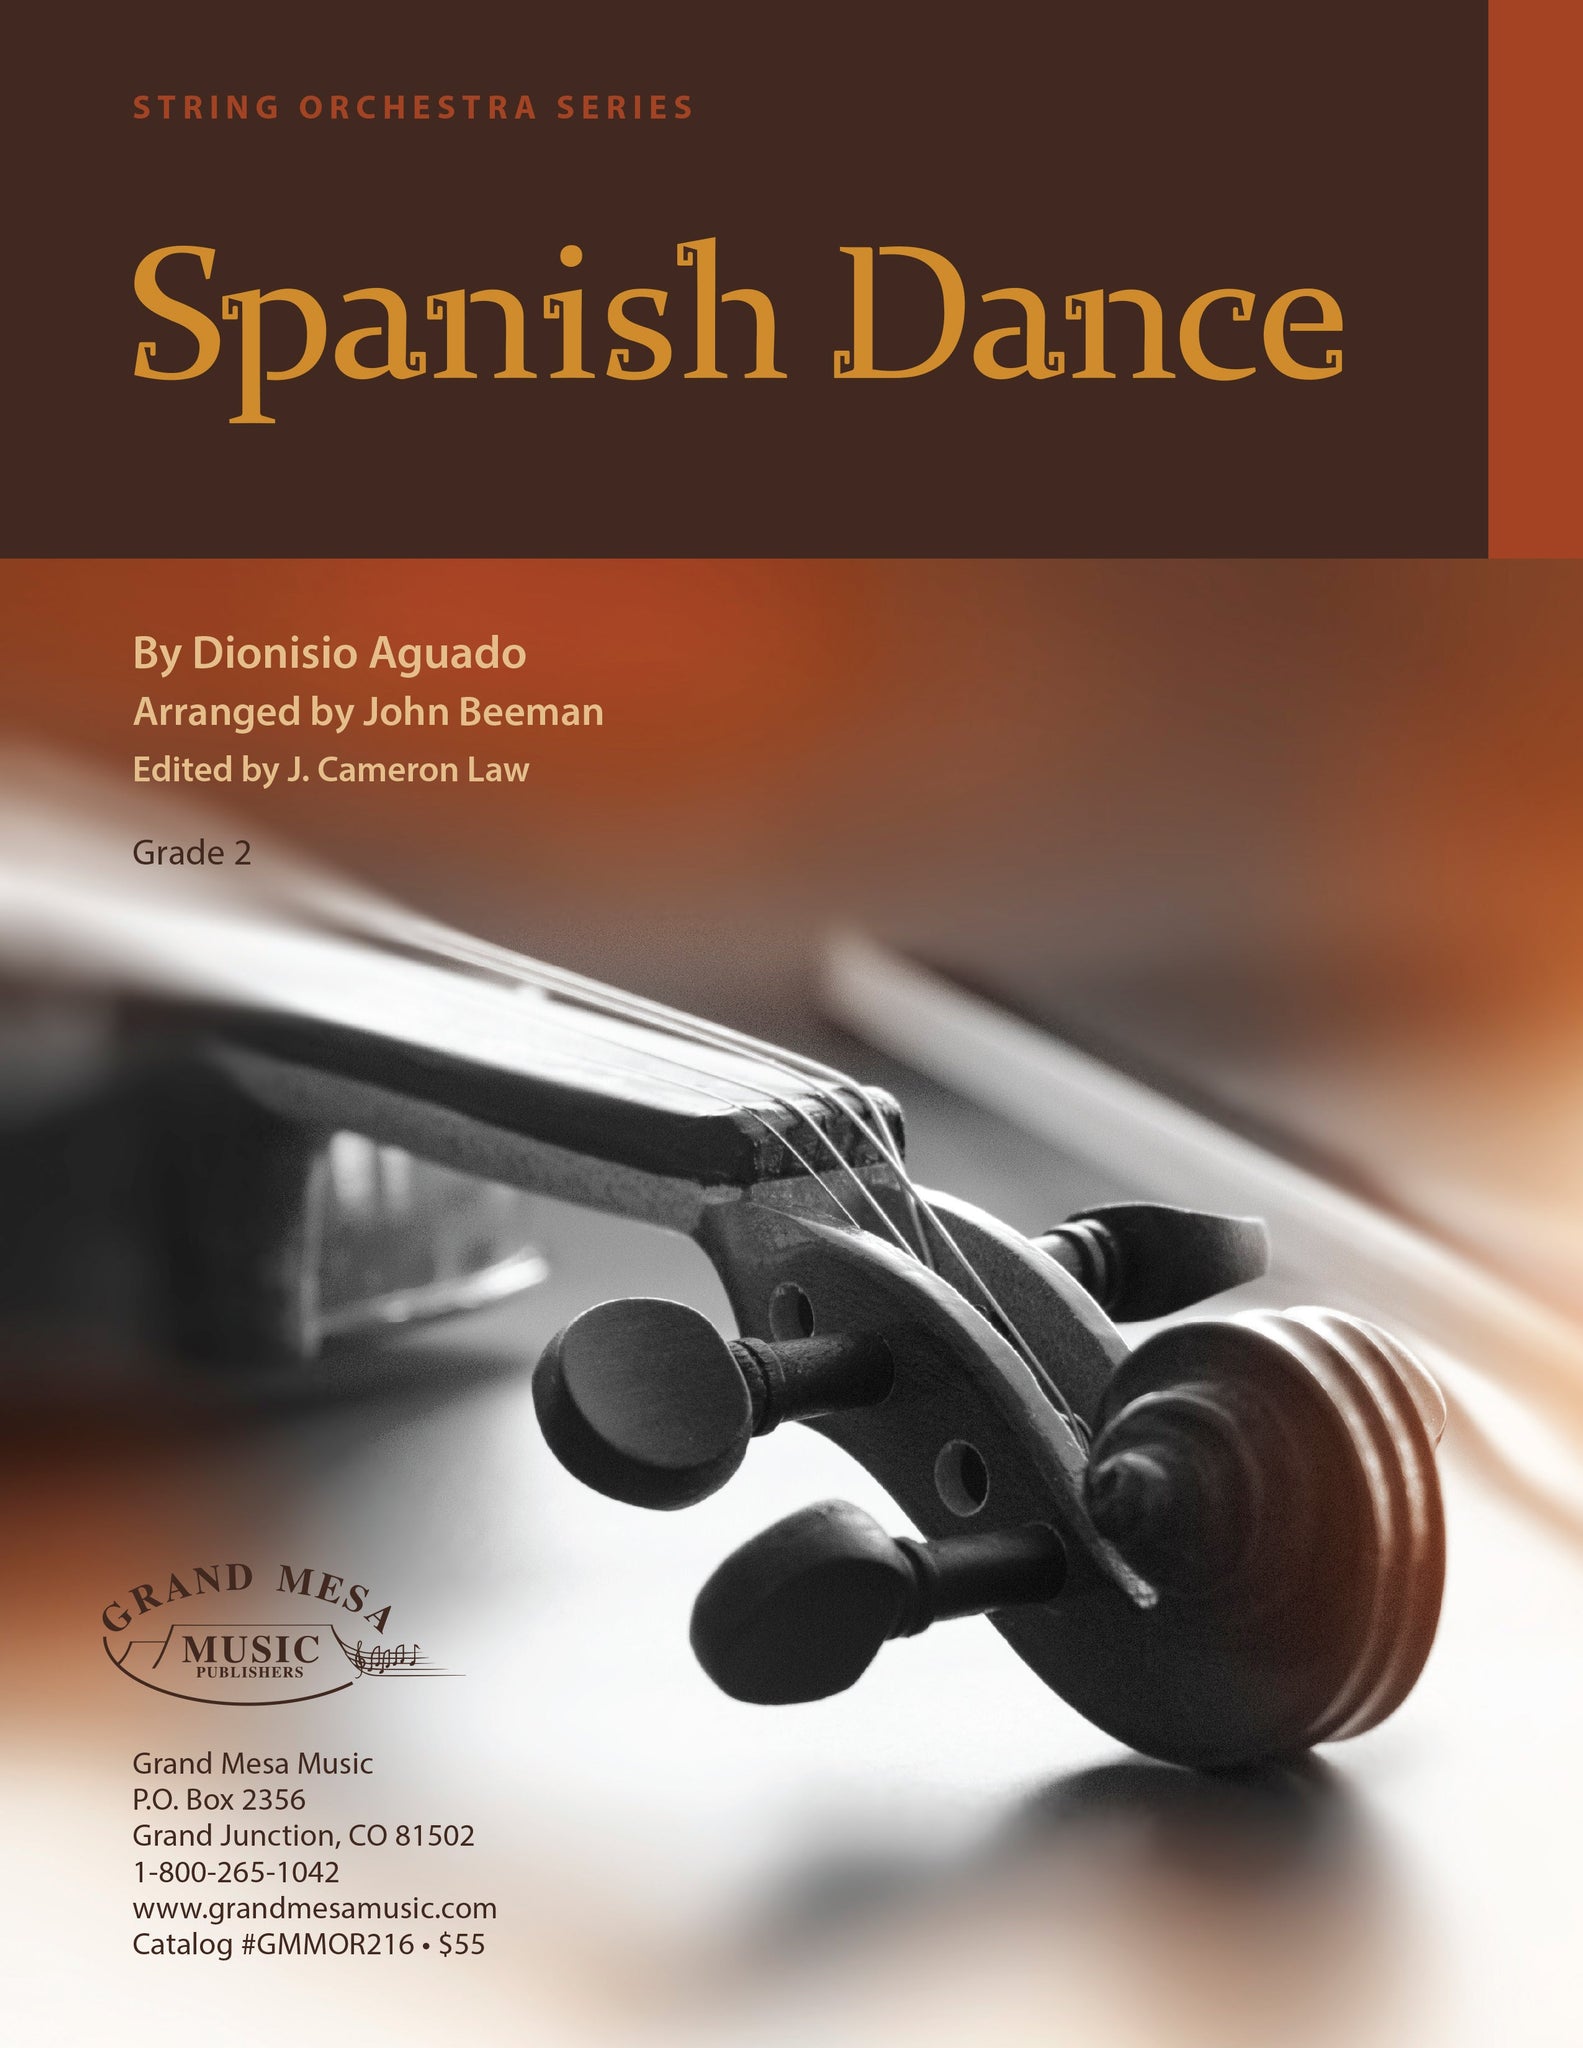 Strings sheet music cover of Spanish Dance, composed by Dionisio Aguado, arranged by John Beeman.